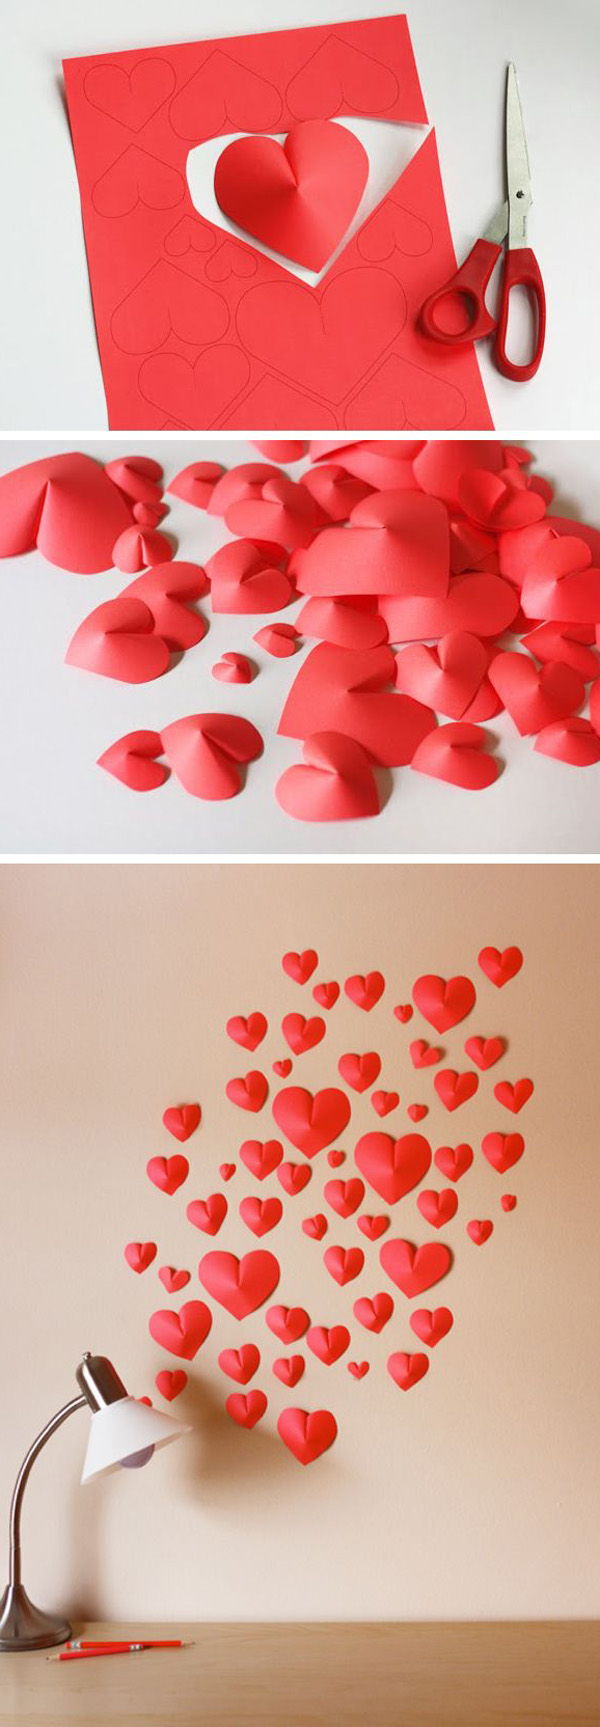 Face a wall of paper hearts. Template for download included